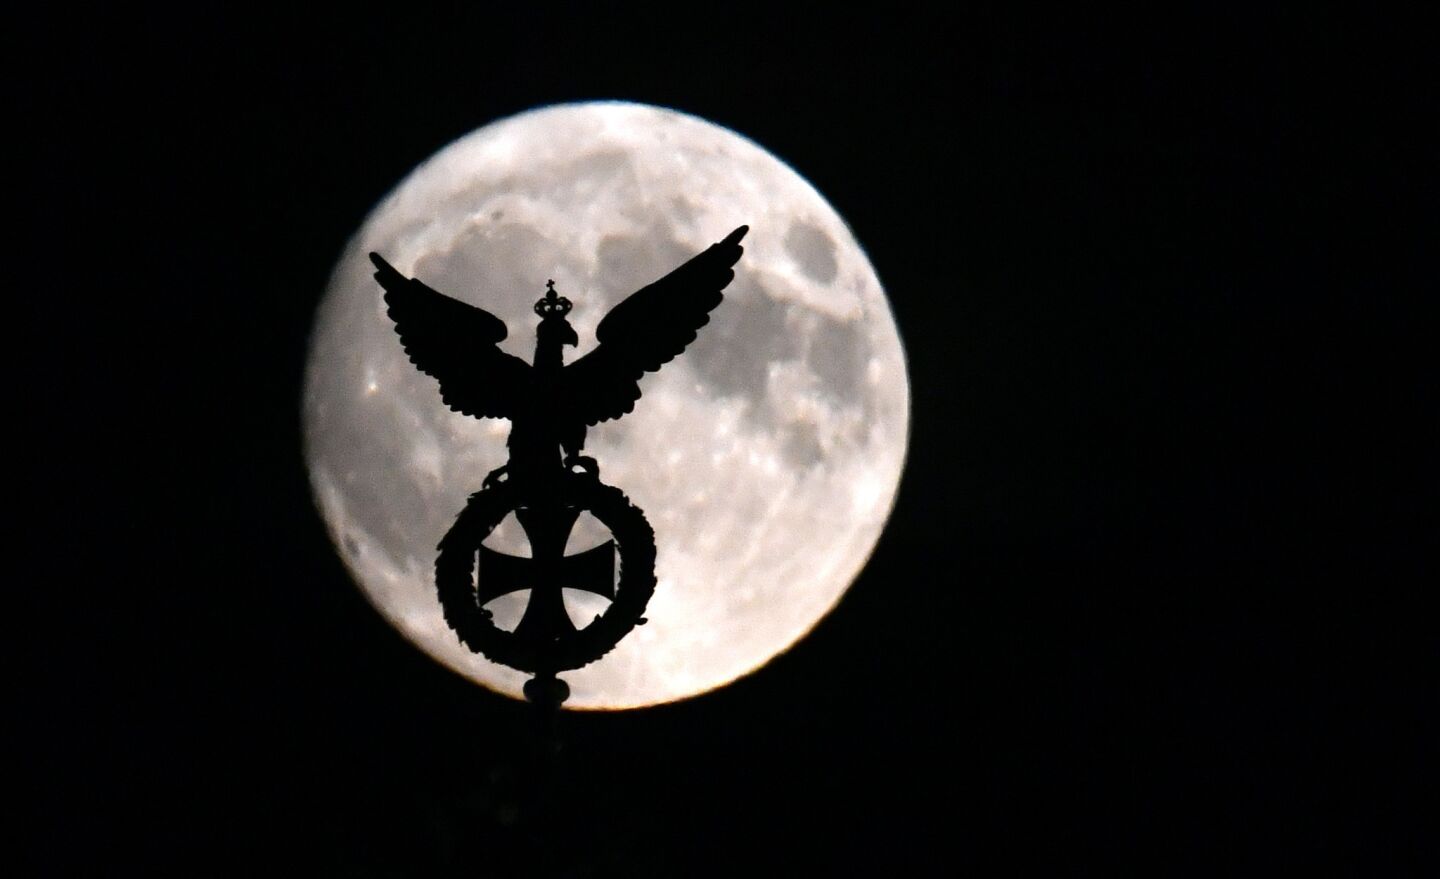 The moon is seen behind the Prussian eagle on top of the Brandenburg Gate in Berlin.